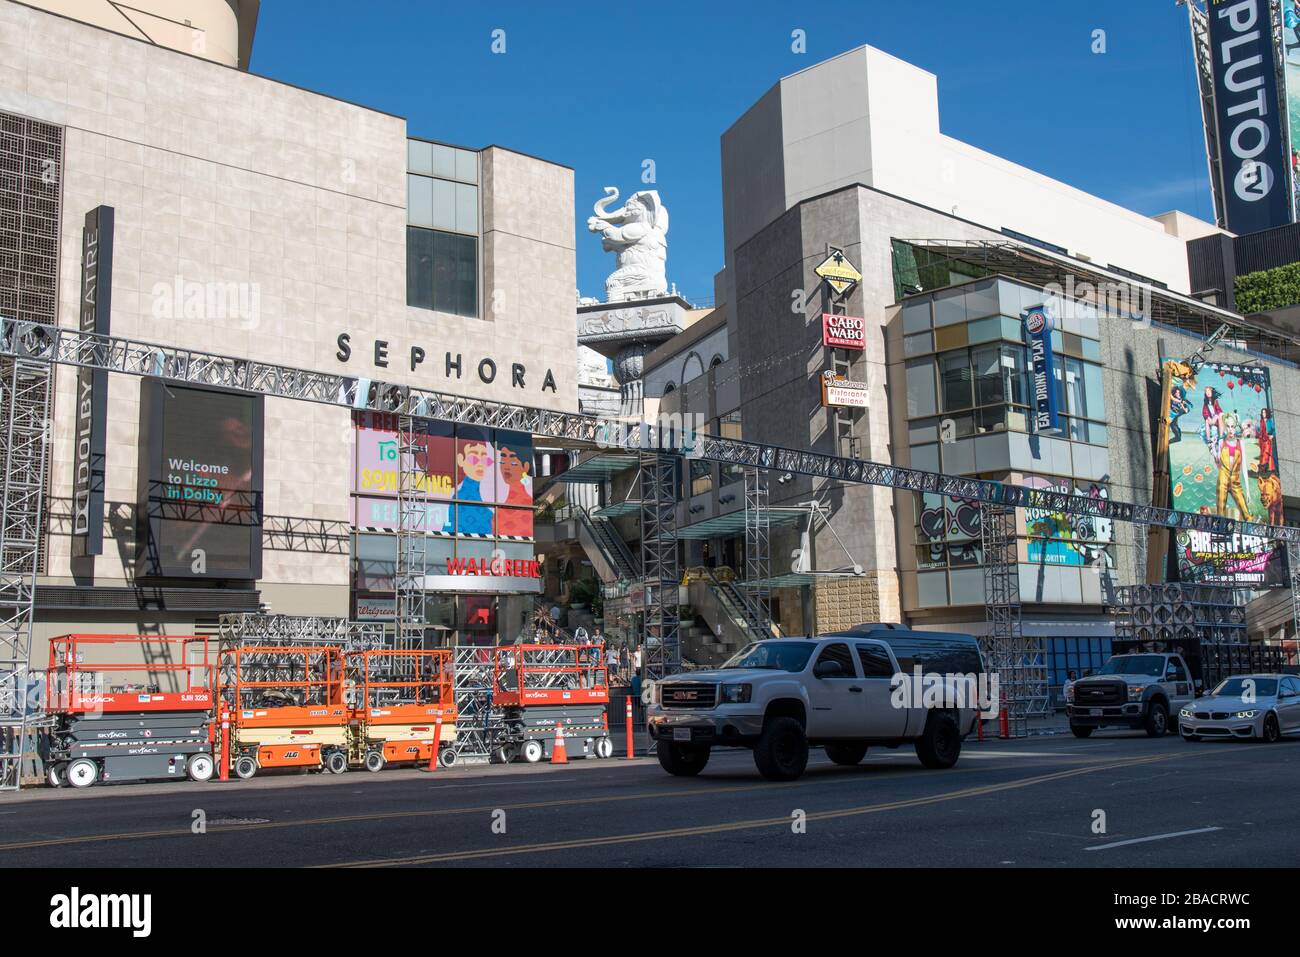 HOLLYWOOD, CA/USA - JANUARY 27, 2020: Crews begin setting up grandstands, lights and sound equipment for Oscars in front of the Dolby Theatre and Holl Stock Photo